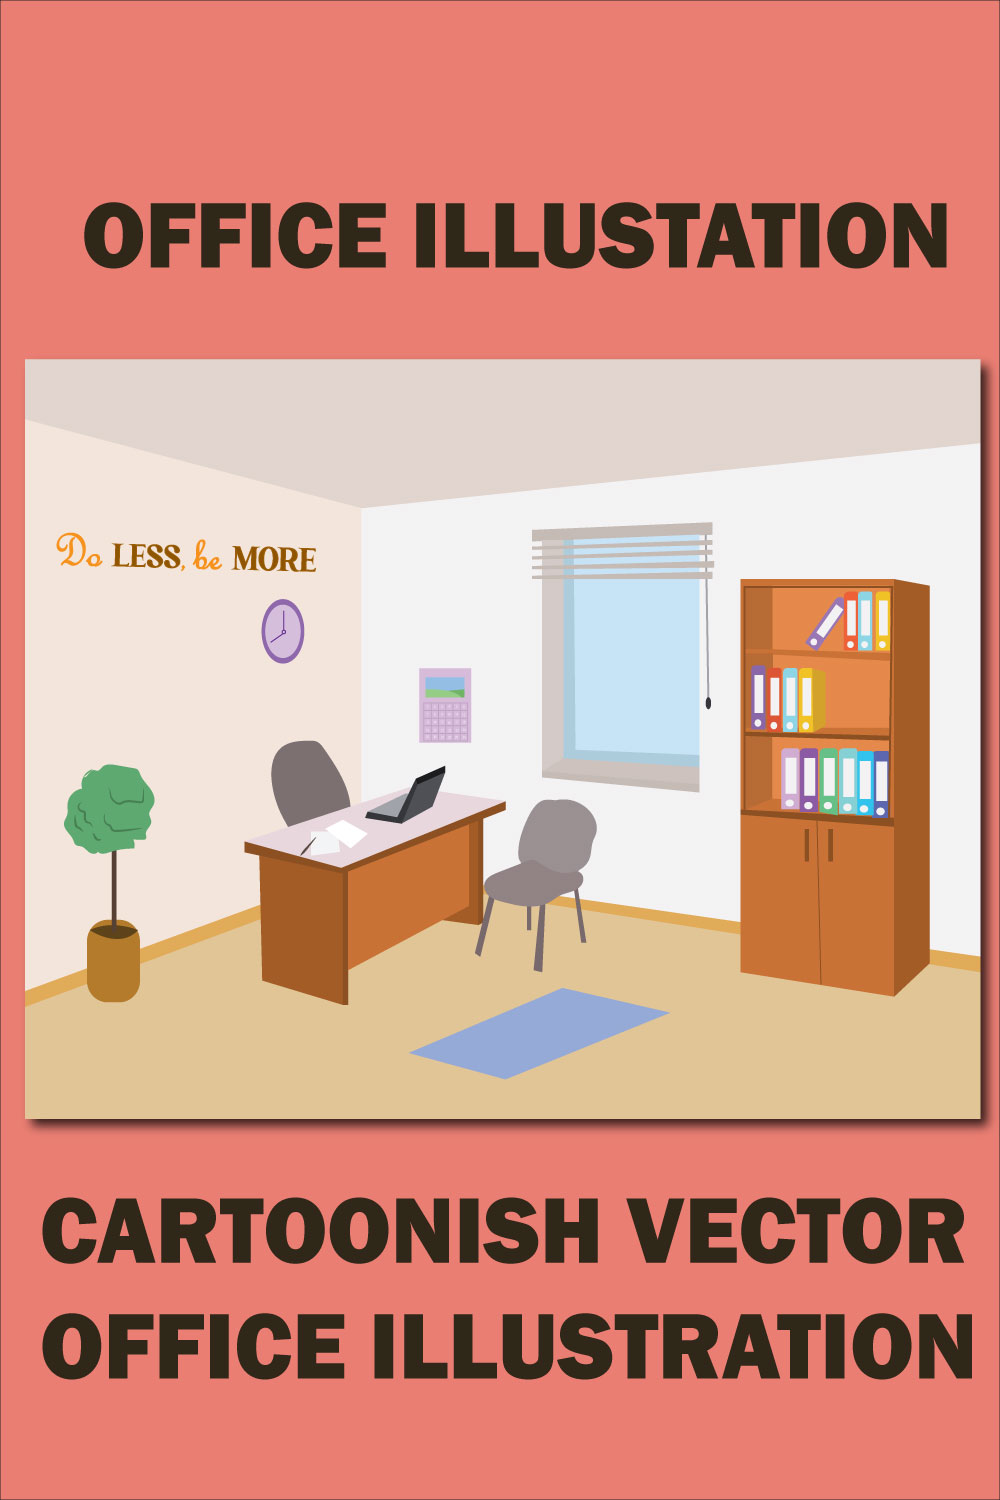 Simple Office Vector Illustration with Office Interior pinterest image.